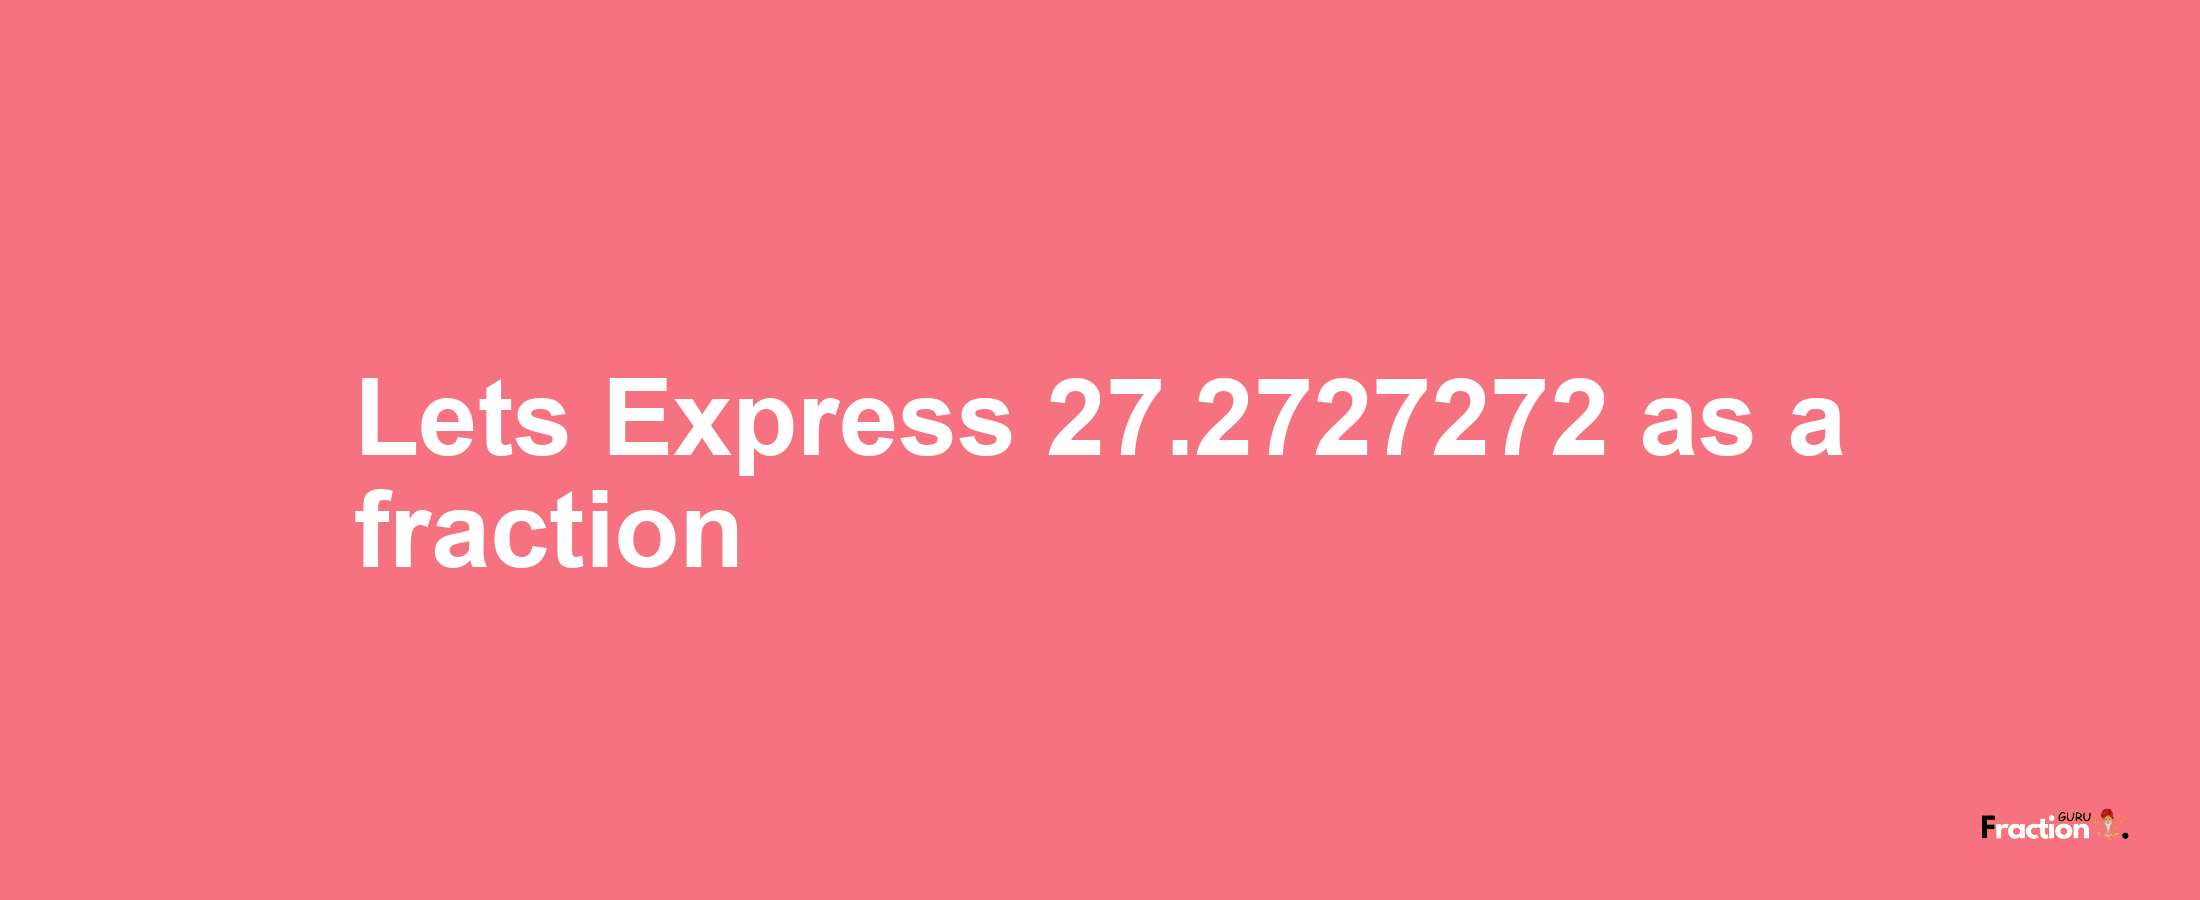 Lets Express 27.2727272 as afraction